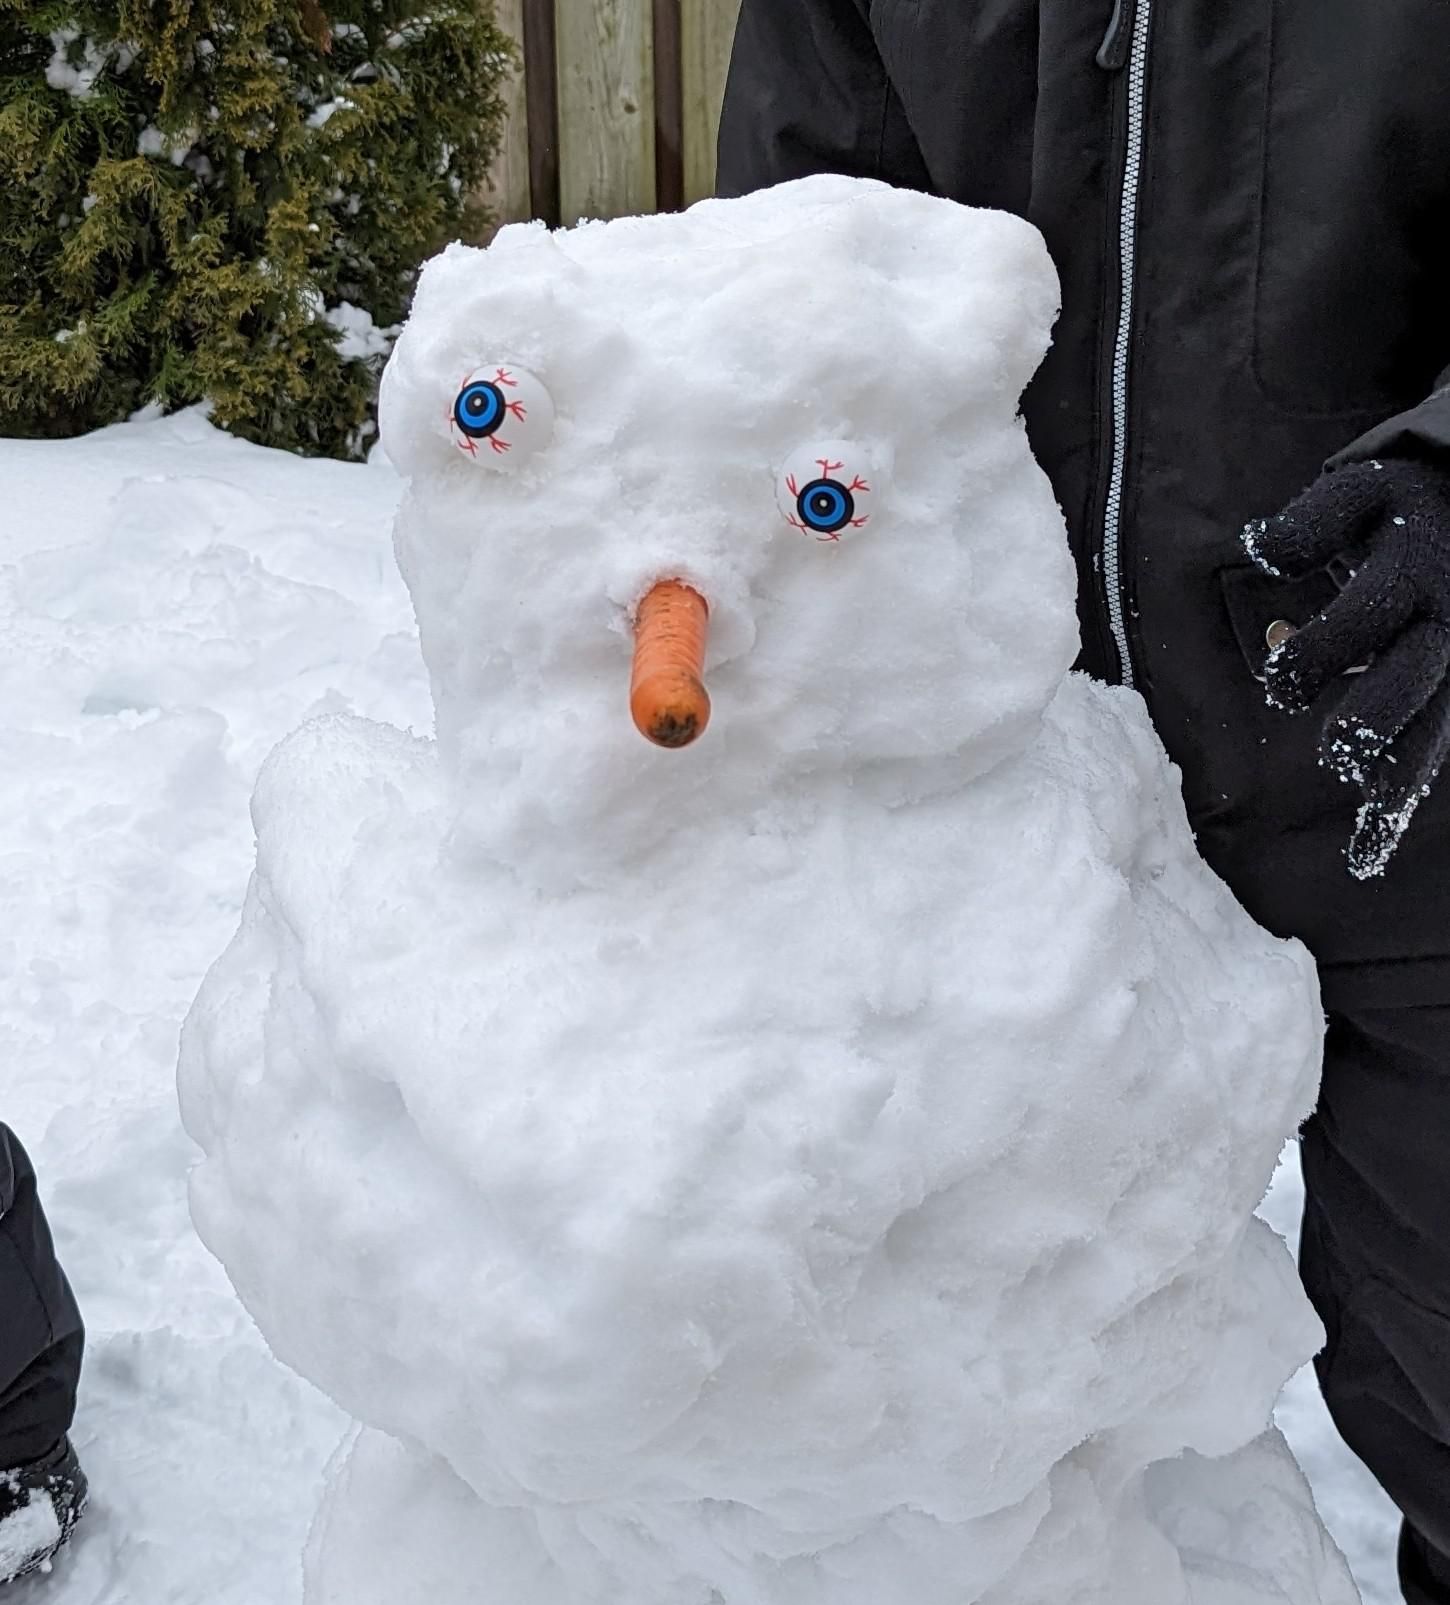 So my kids made a snowman and found Halloween eyes...